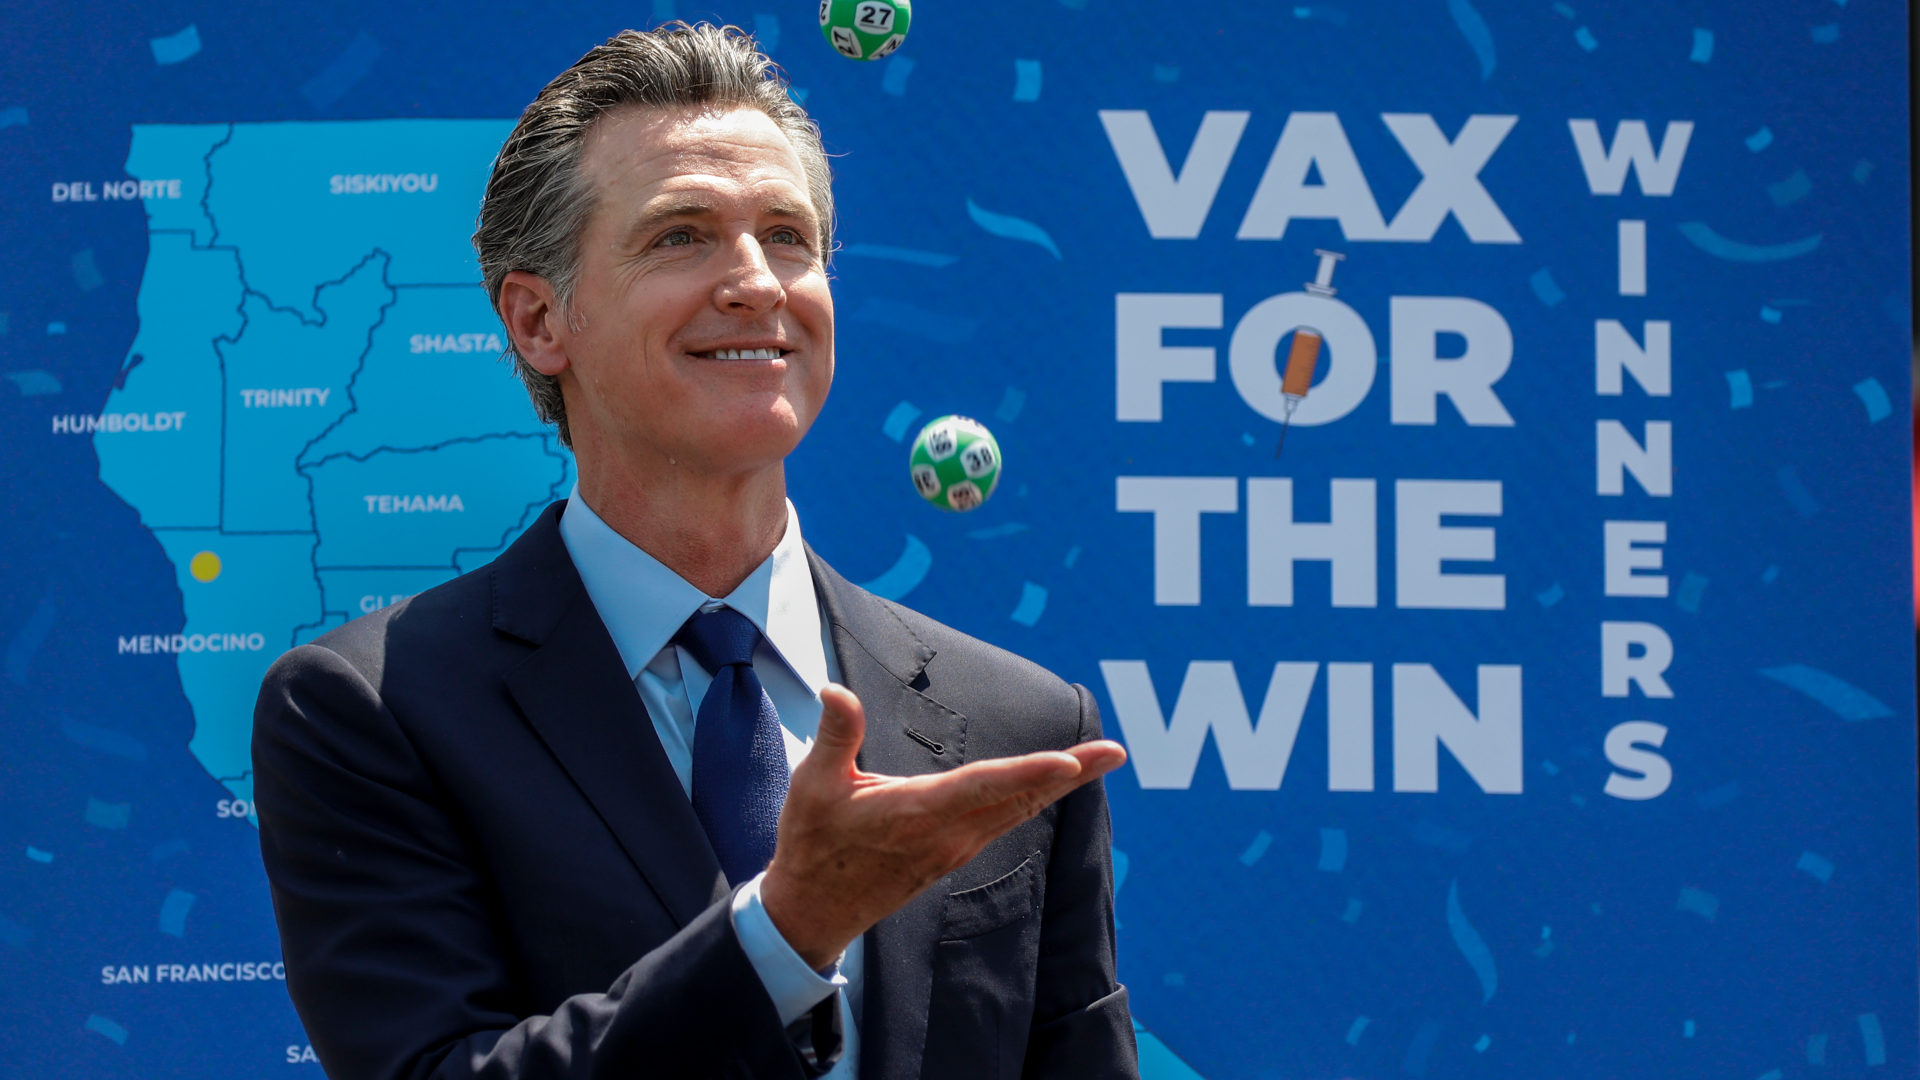 Governor Gavin Newsom juggles numbered balls during the drawing for California's "Vax for the Win" vaccine incentive program.